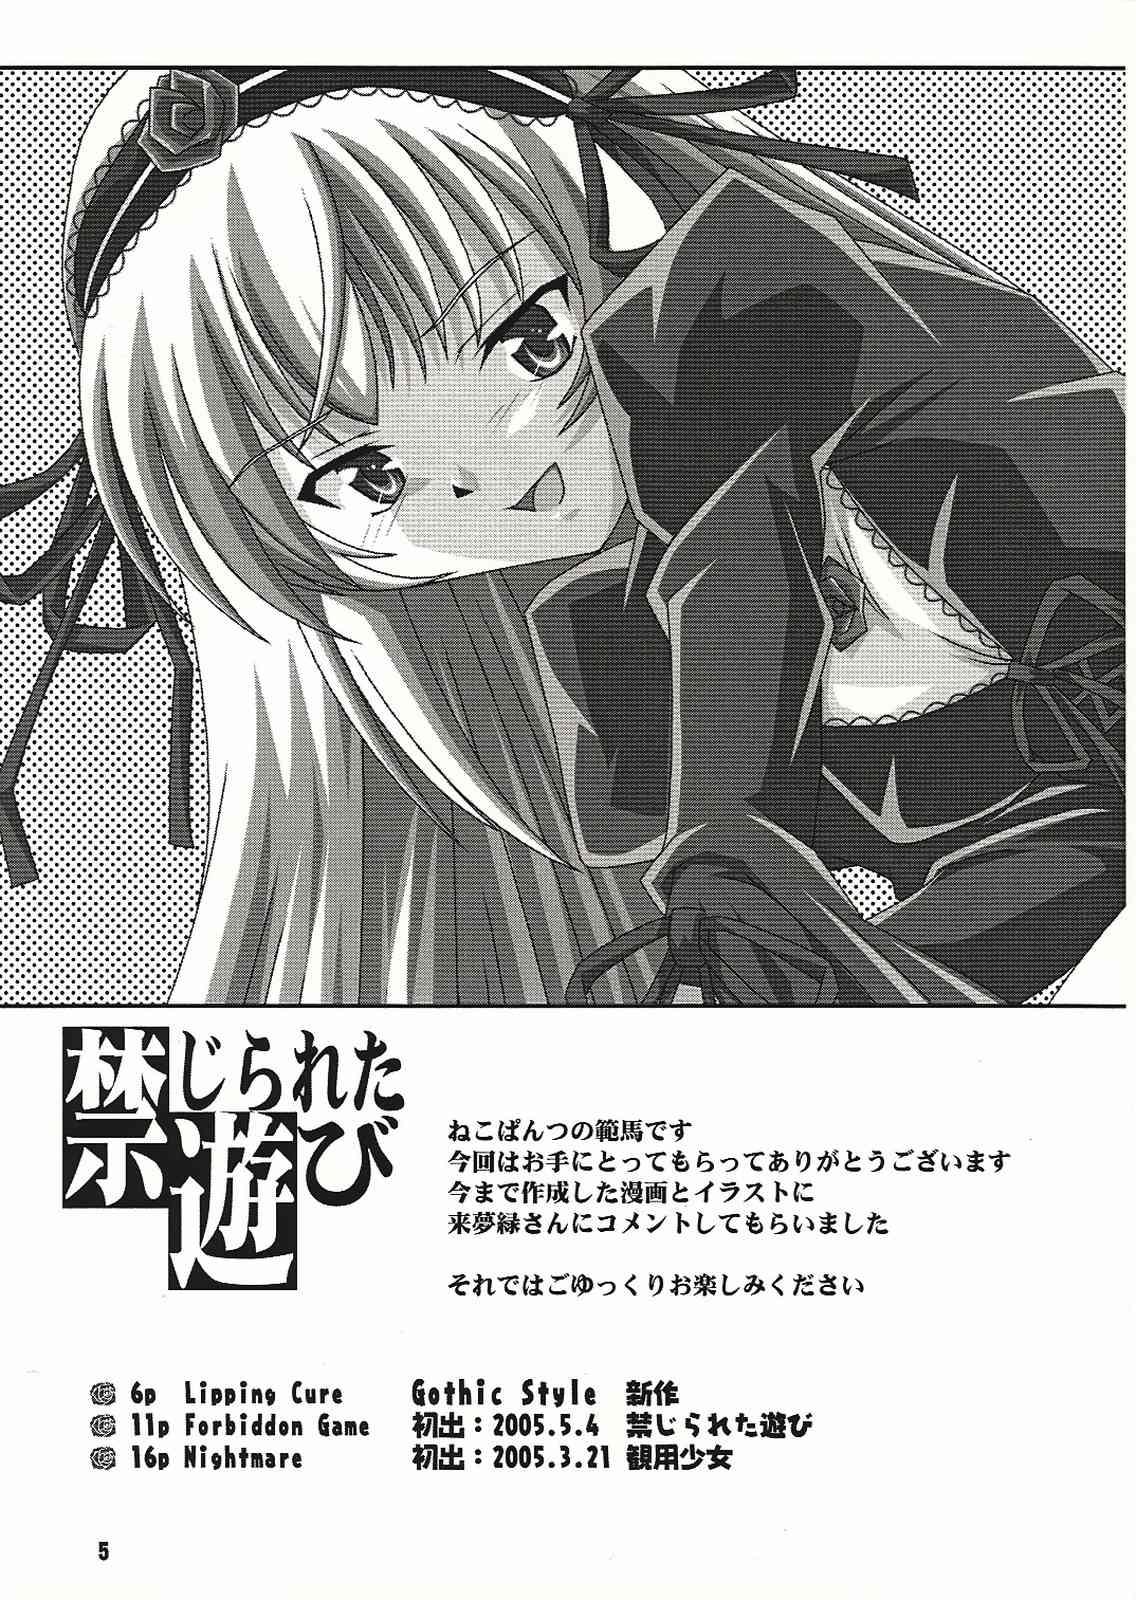 Teentube Gothic Style - Rozen maiden Tight Pussy - Page 4